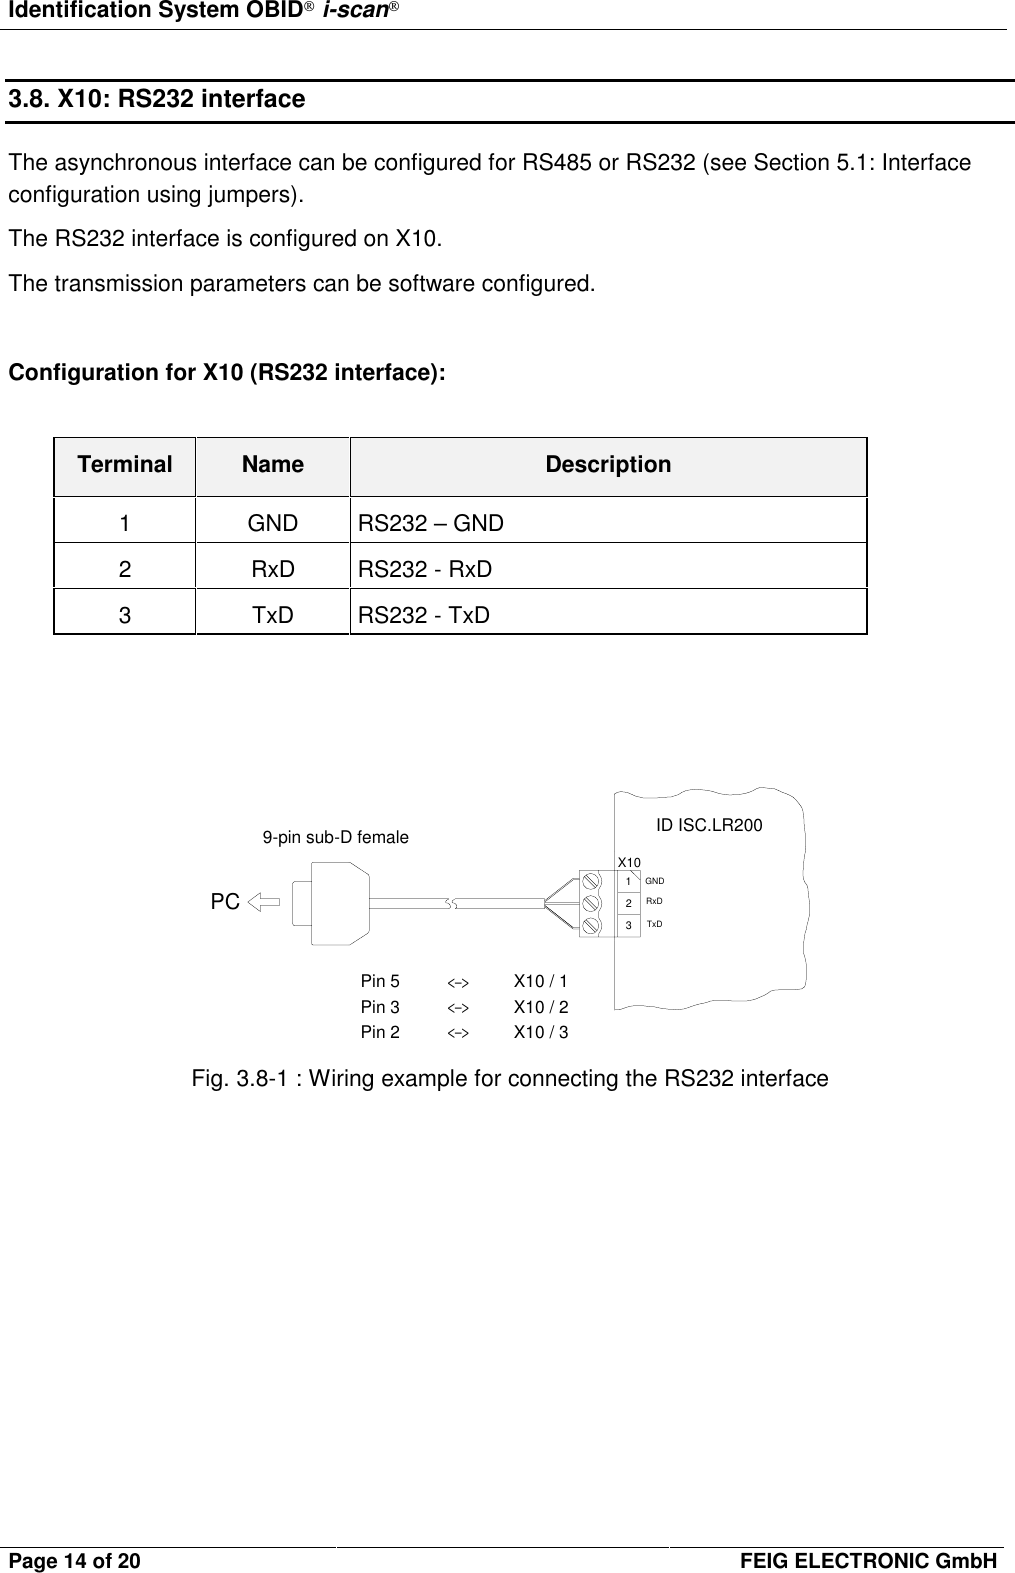 Identification System OBID i-scanPage 14 of 20 FEIG ELECTRONIC GmbH3.8. X10: RS232 interfaceThe asynchronous interface can be configured for RS485 or RS232 (see Section 5.1: Interfaceconfiguration using jumpers).The RS232 interface is configured on X10.The transmission parameters can be software configured.Configuration for X10 (RS232 interface):Terminal Name Description1GNDRS232 – GND2 RxD RS232 - RxD3 TxD RS232 - TxDX10123GNDRxDTxDID ISC.LR2009-pin sub-D femalePin 5 X10 / 1Pin 3 X10 / 2Pin 2 X10 / 3&lt;−&gt;&lt;−&gt;&lt;−&gt;PCFig. 3.8-1 : Wiring example for connecting the RS232 interface